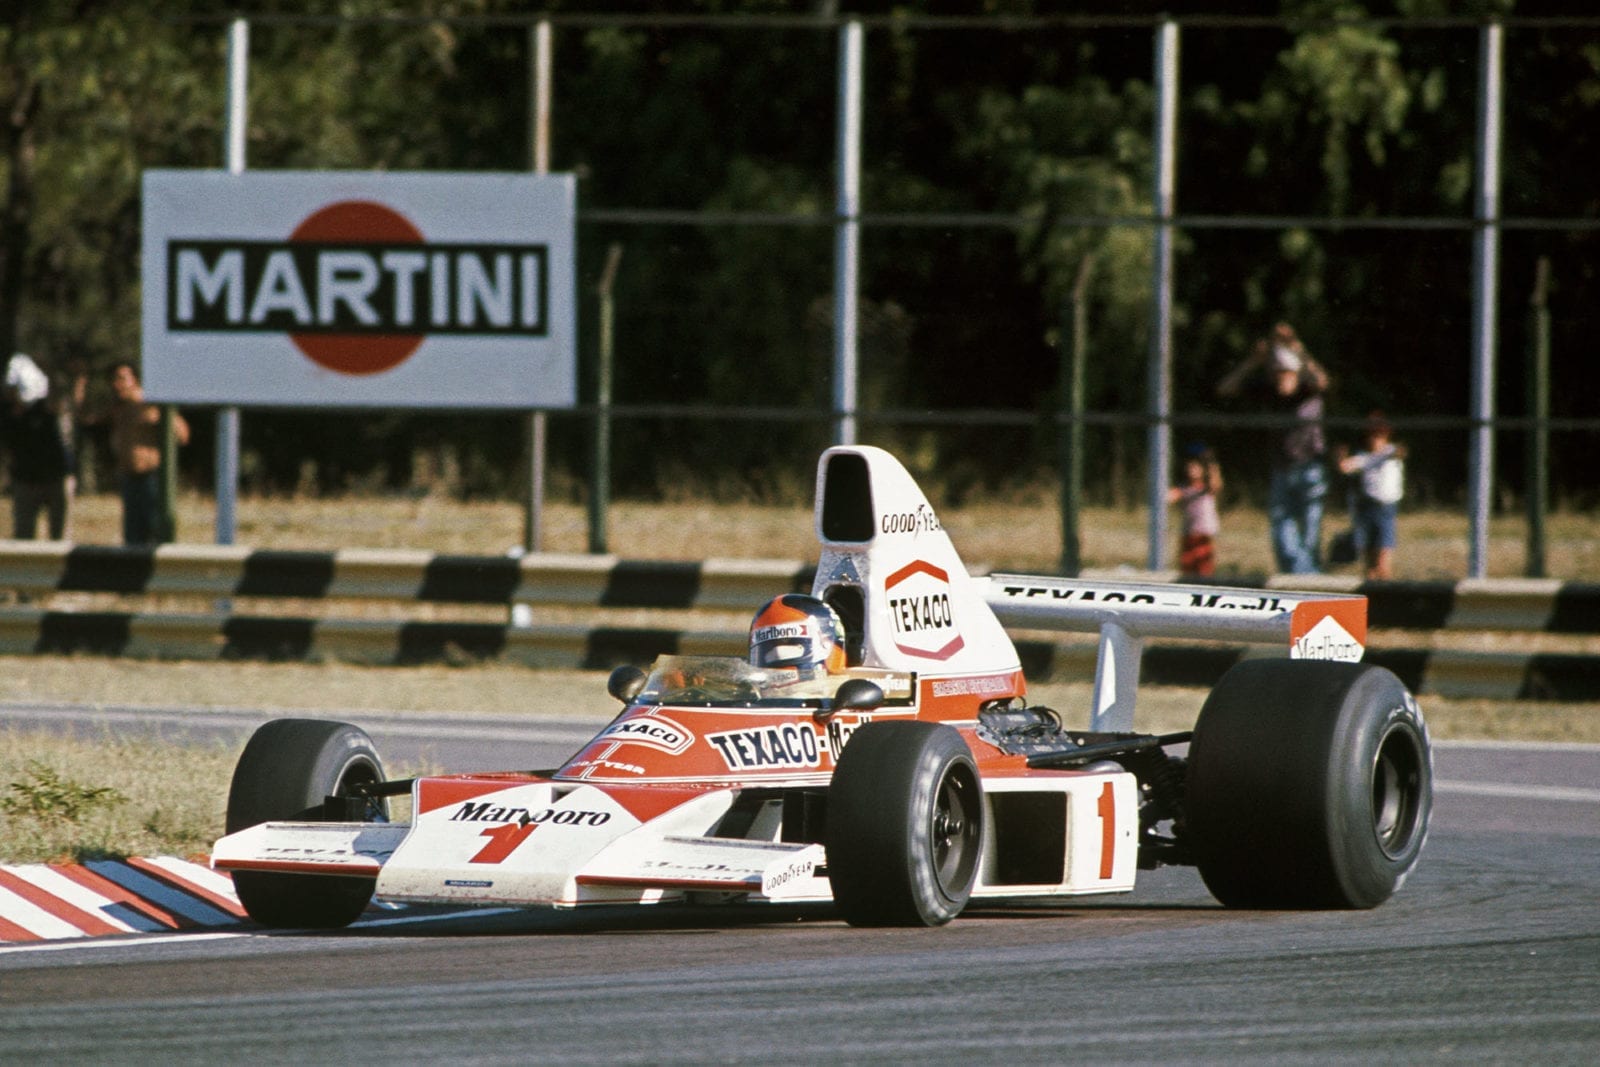 Emerson Fittipaldi sets the pace in his McLaren at the 1975 Argentinian Grand Prix.